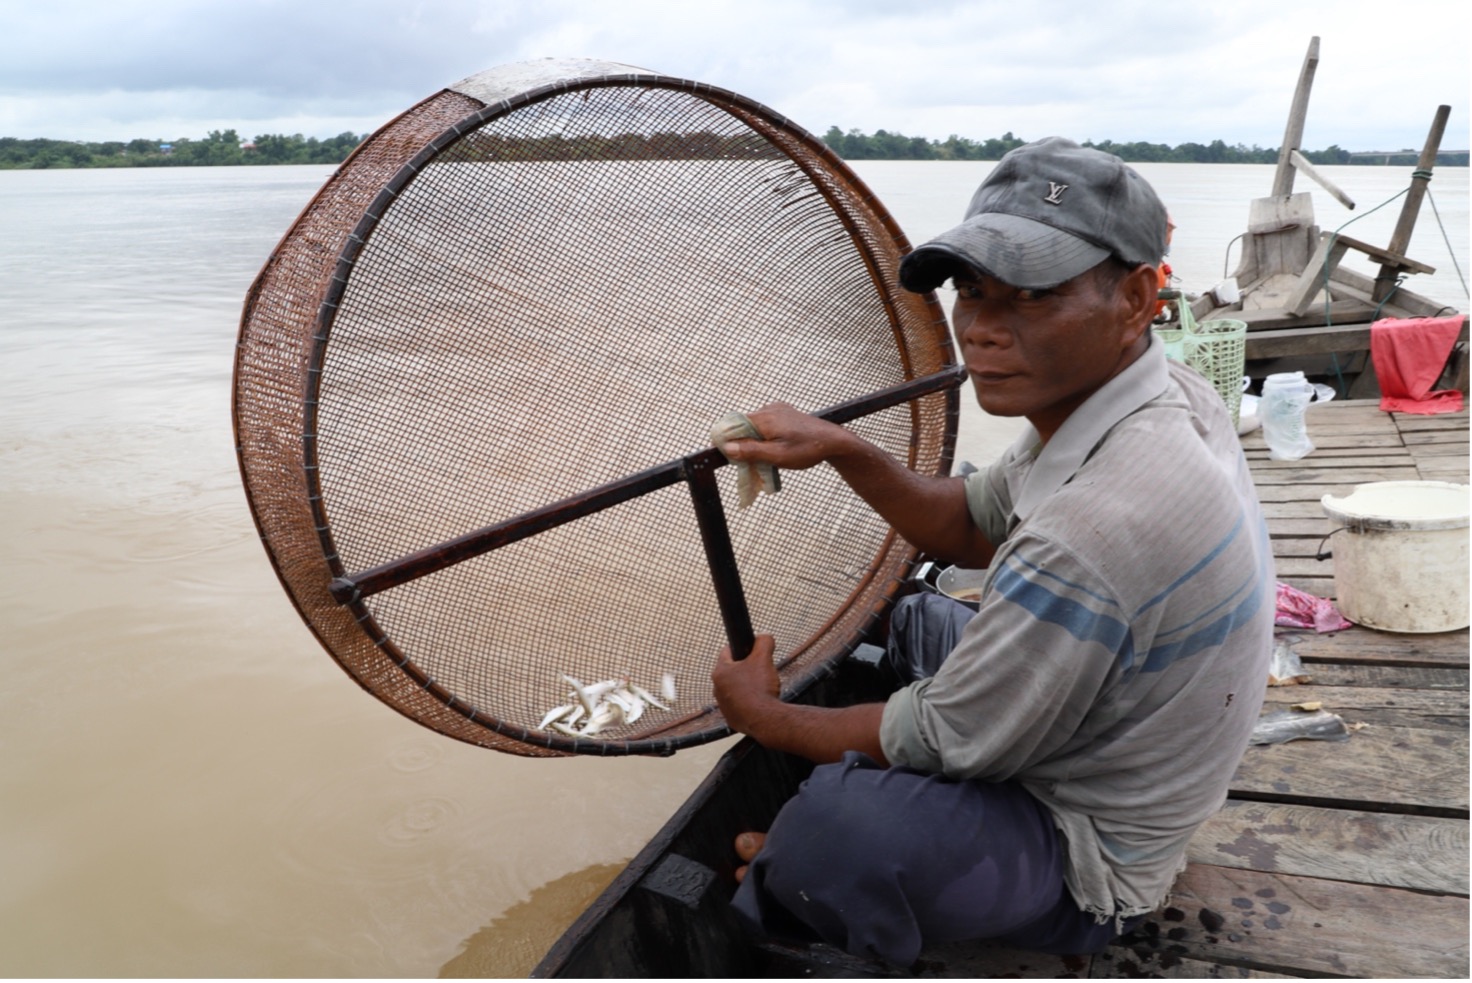 A Small-scale Fishing Gear: The Big Round Scoop Basket - Mekong Fish Network